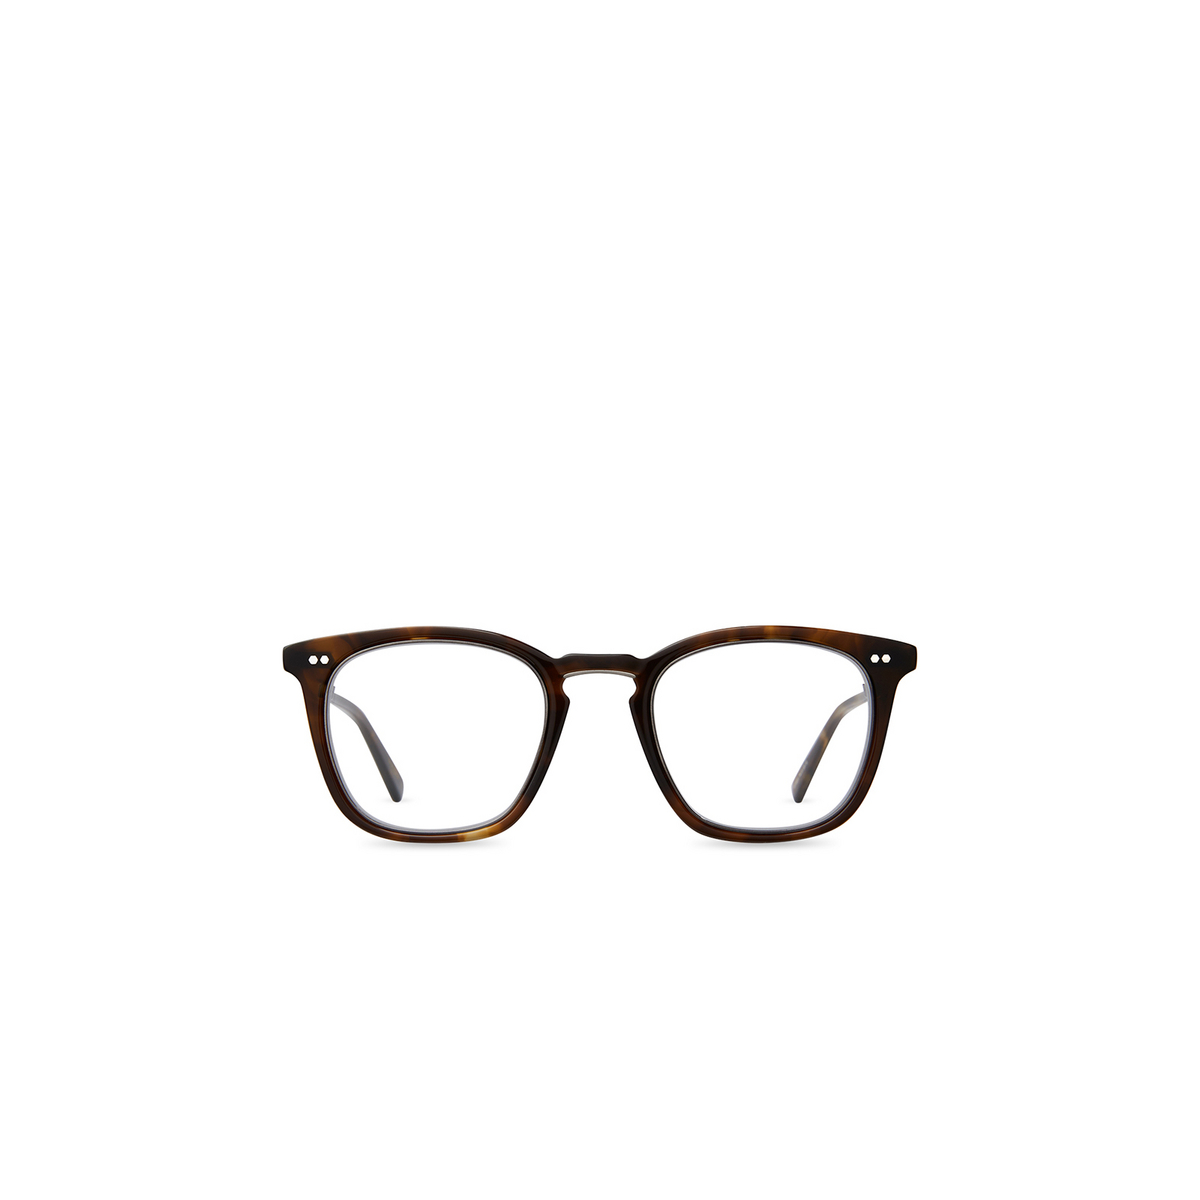 Mr. Leight GETTY II C Eyeglasses CACT-PW Cacao Tortoise-Pewter - front view